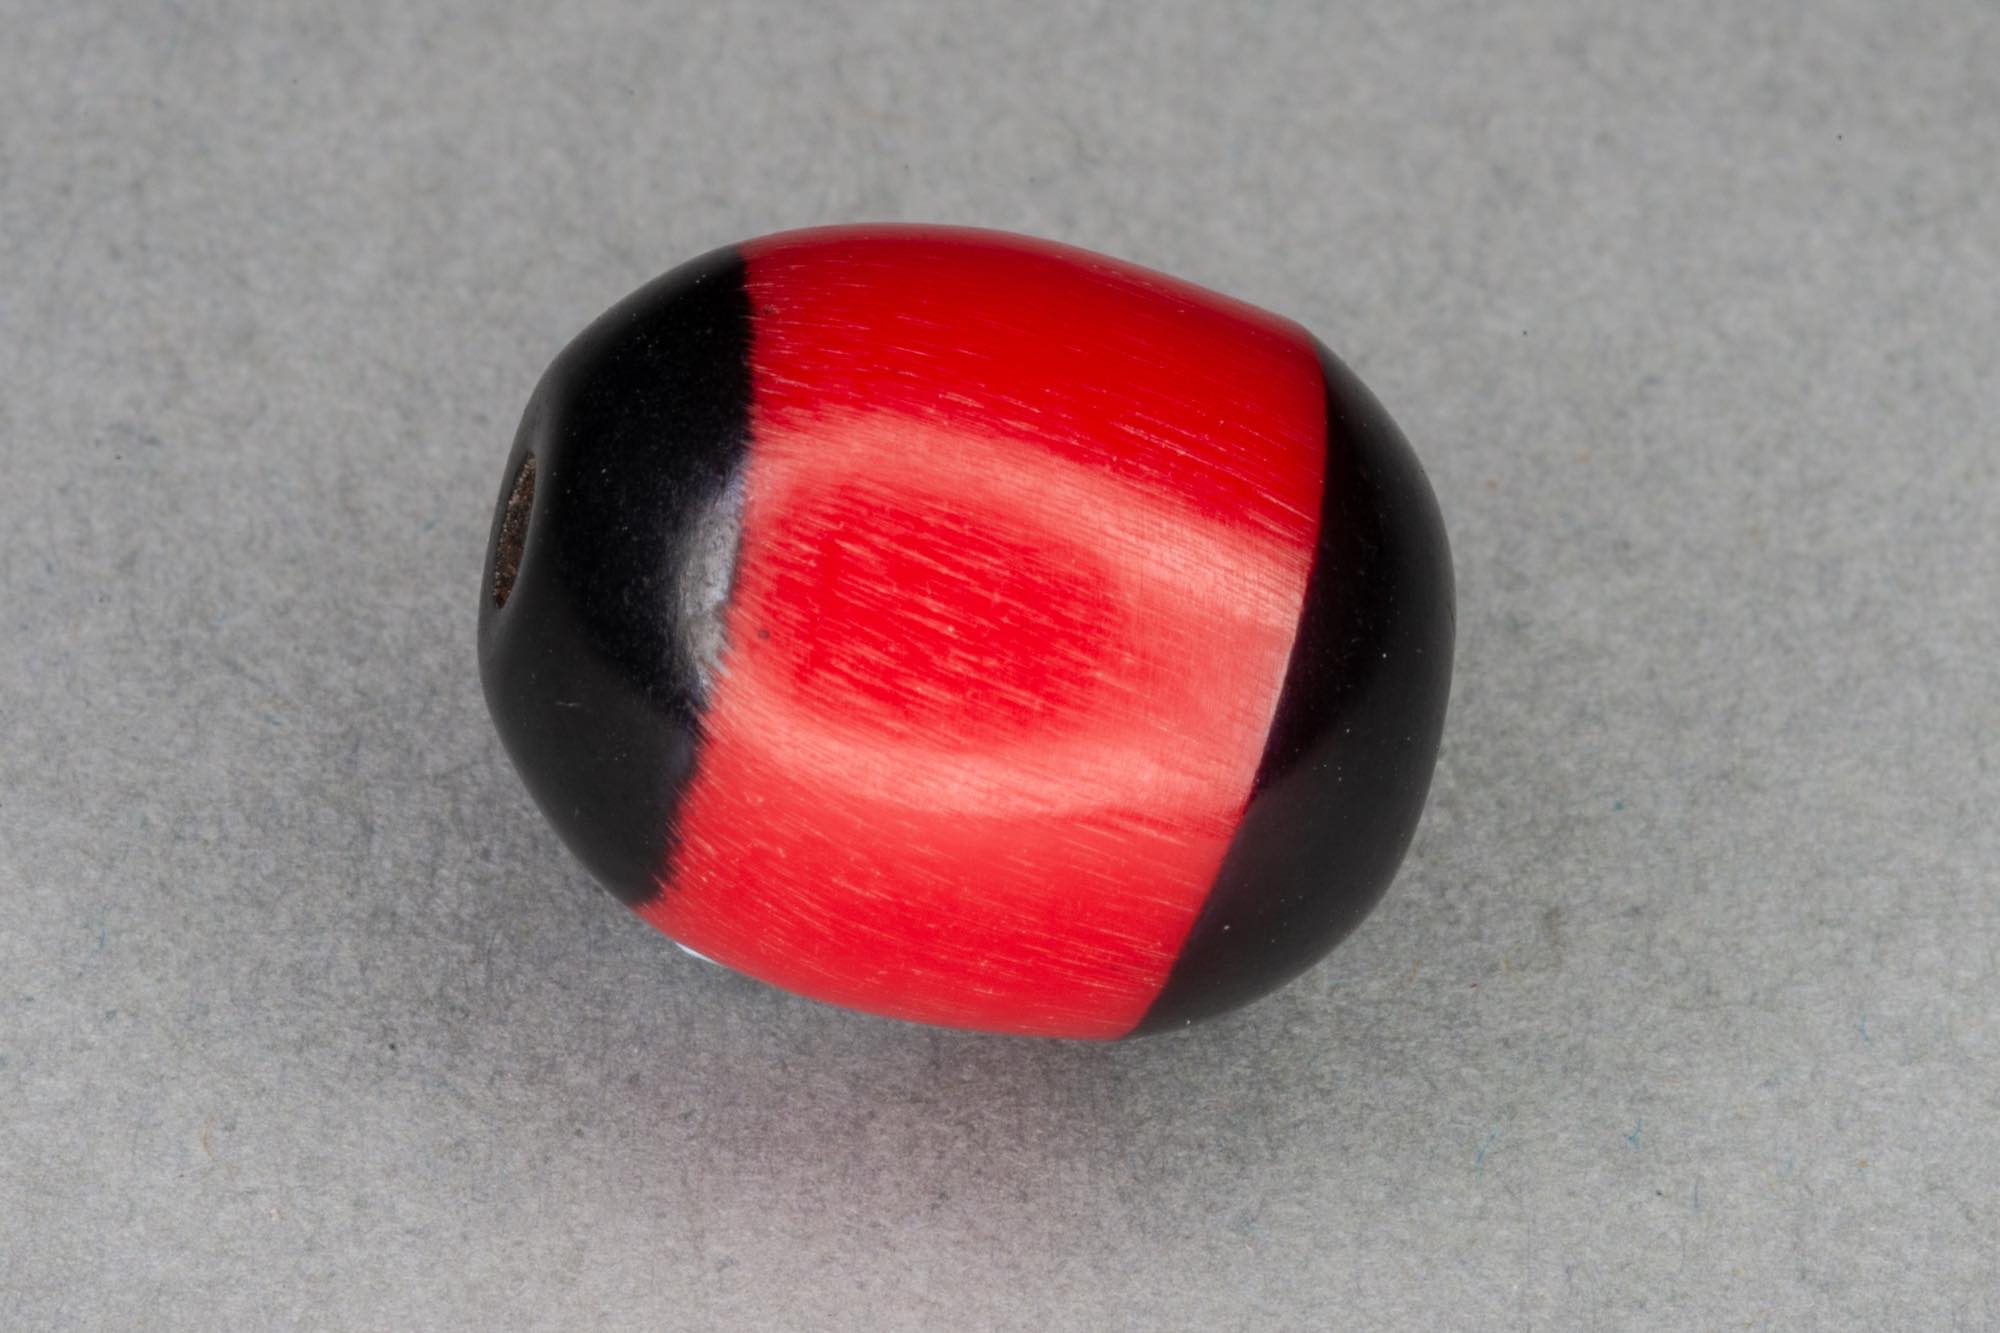 Red Oval Resin Bead With Black Ends, 14x11mm, 1.5mm hole